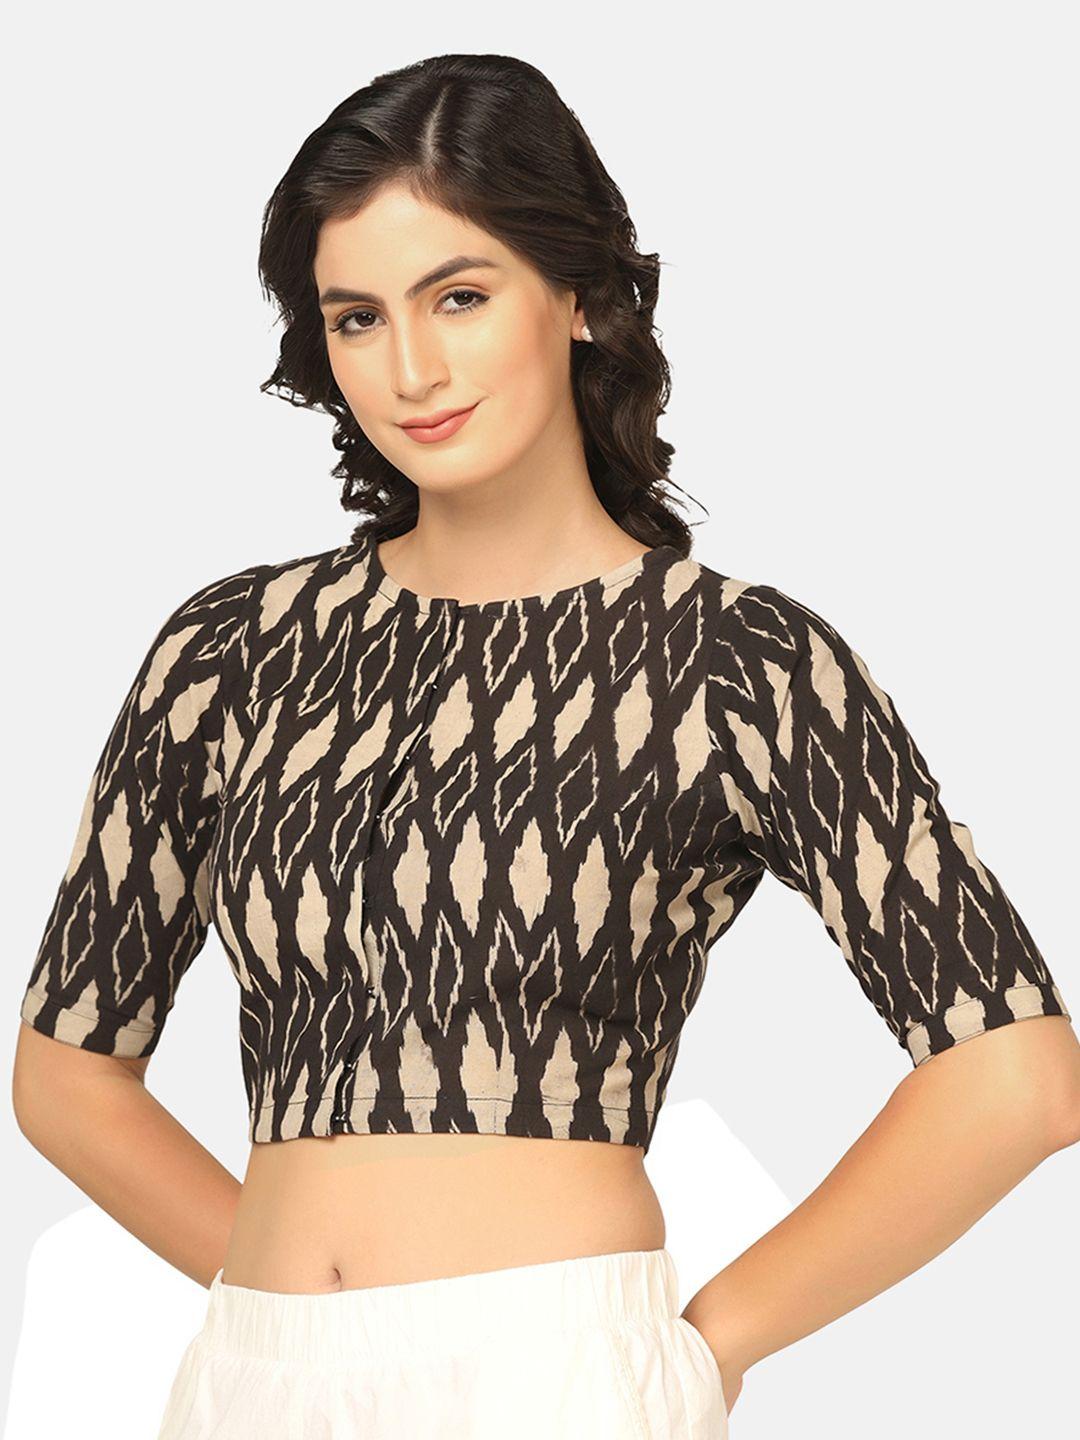 the-weave-traveller-women-black-&-beige-hand-block-printed-readymade-sustainable-saree-blouse